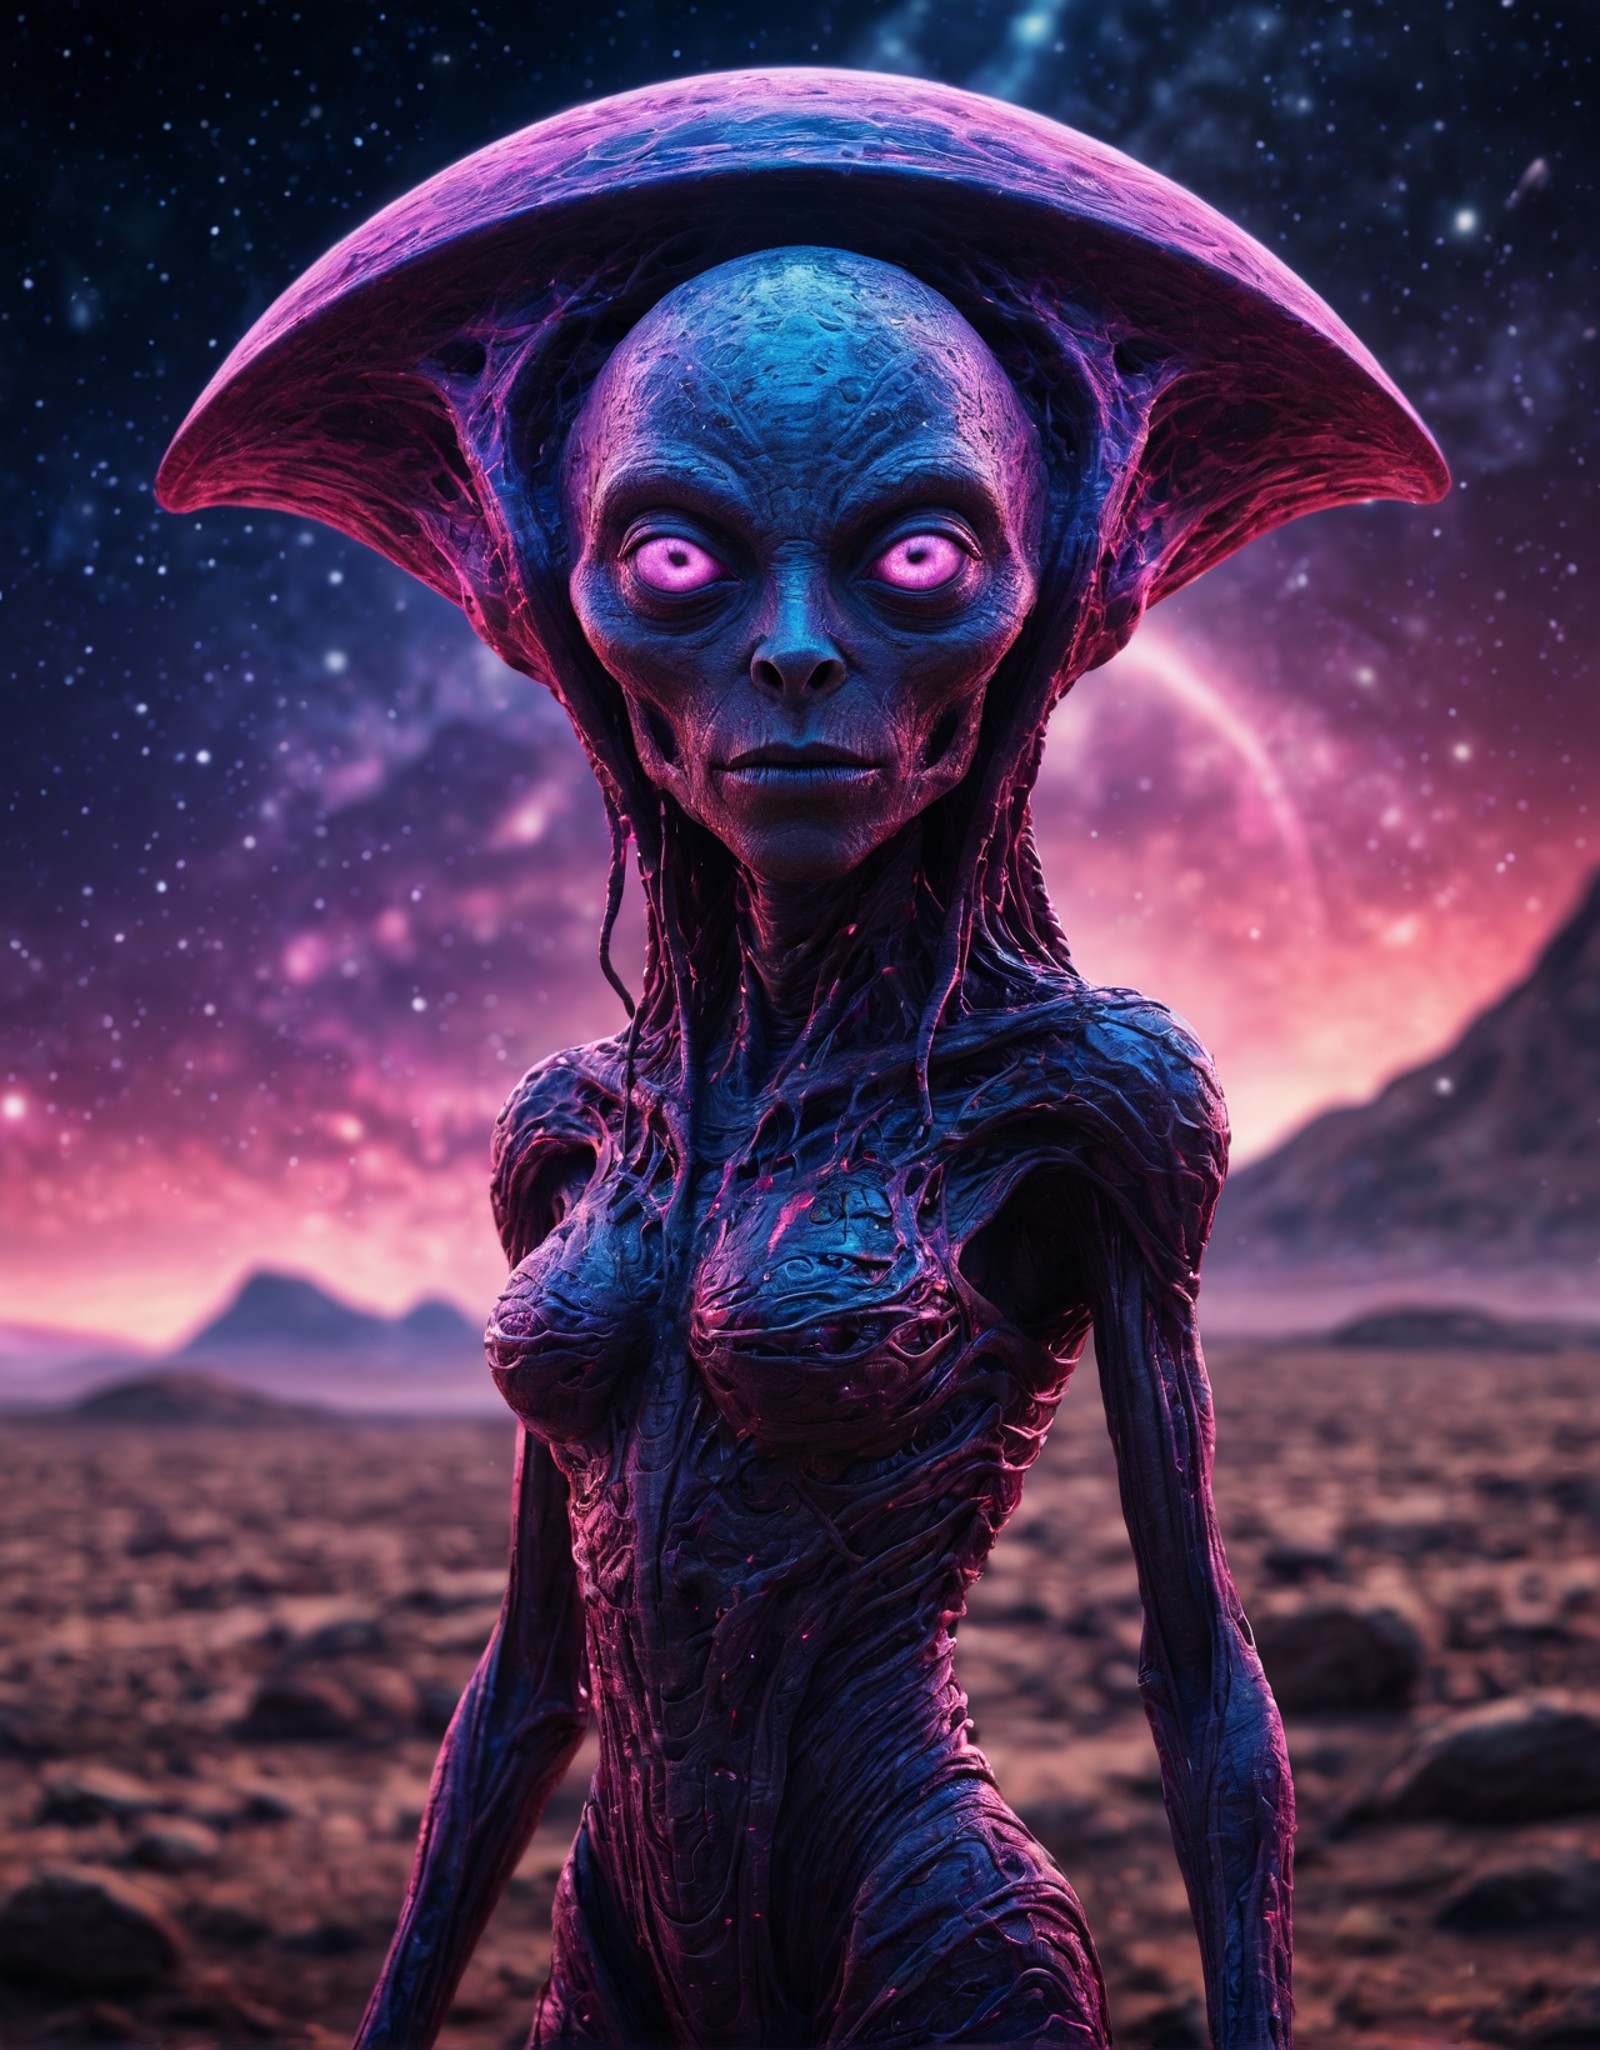 breathtaking  epic artwork of an enigmatic alien from an unknown habitable planet. Vivid colors and intricate details surr...